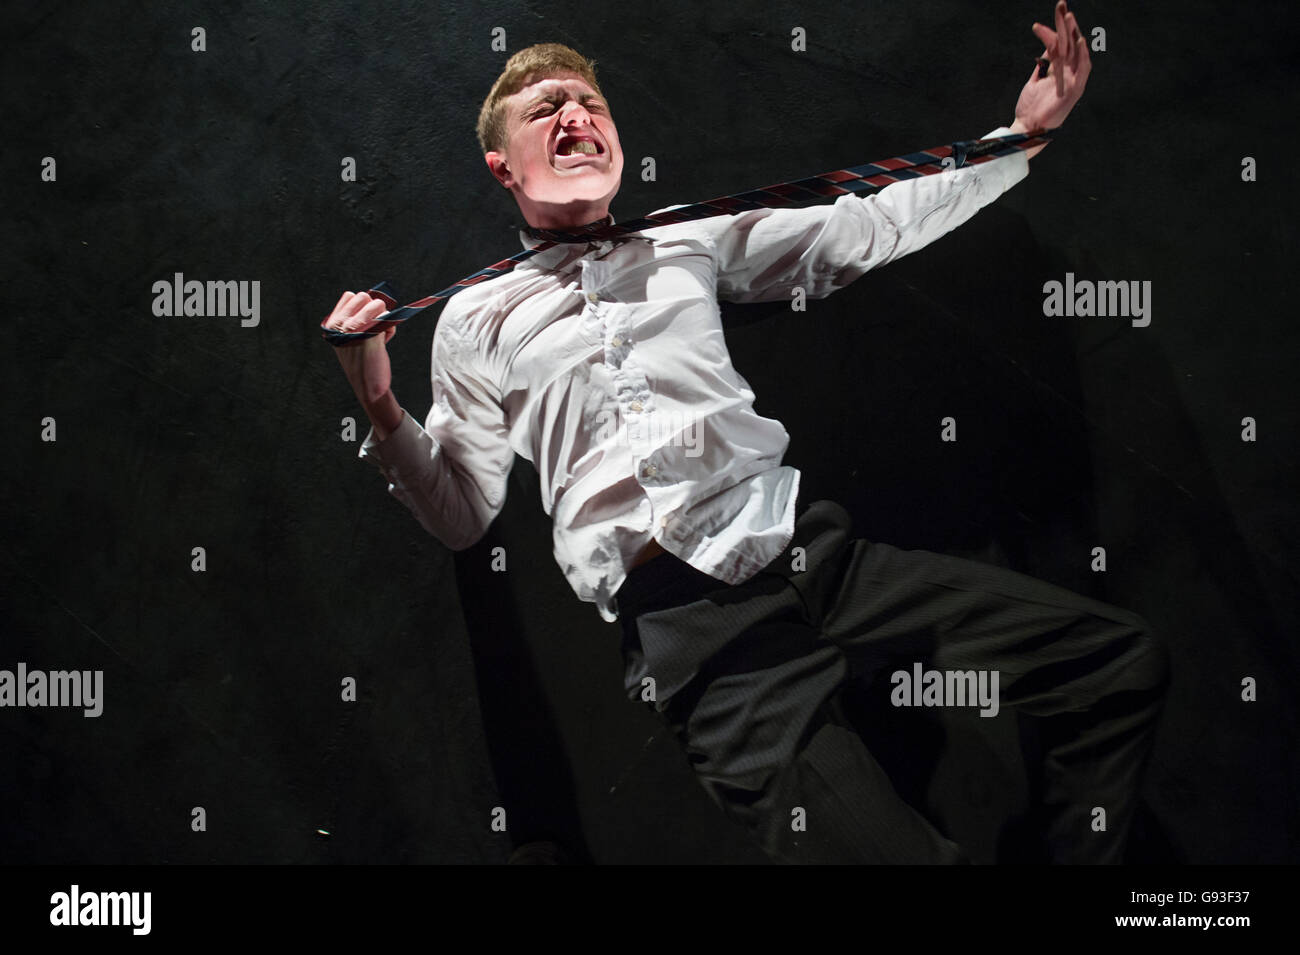 A young male student at Aberystwyth University theatre studies department performing a self-devised one-man solo intensive physical theatre production project as part of his final year degree assessment  Wales UK Stock Photo